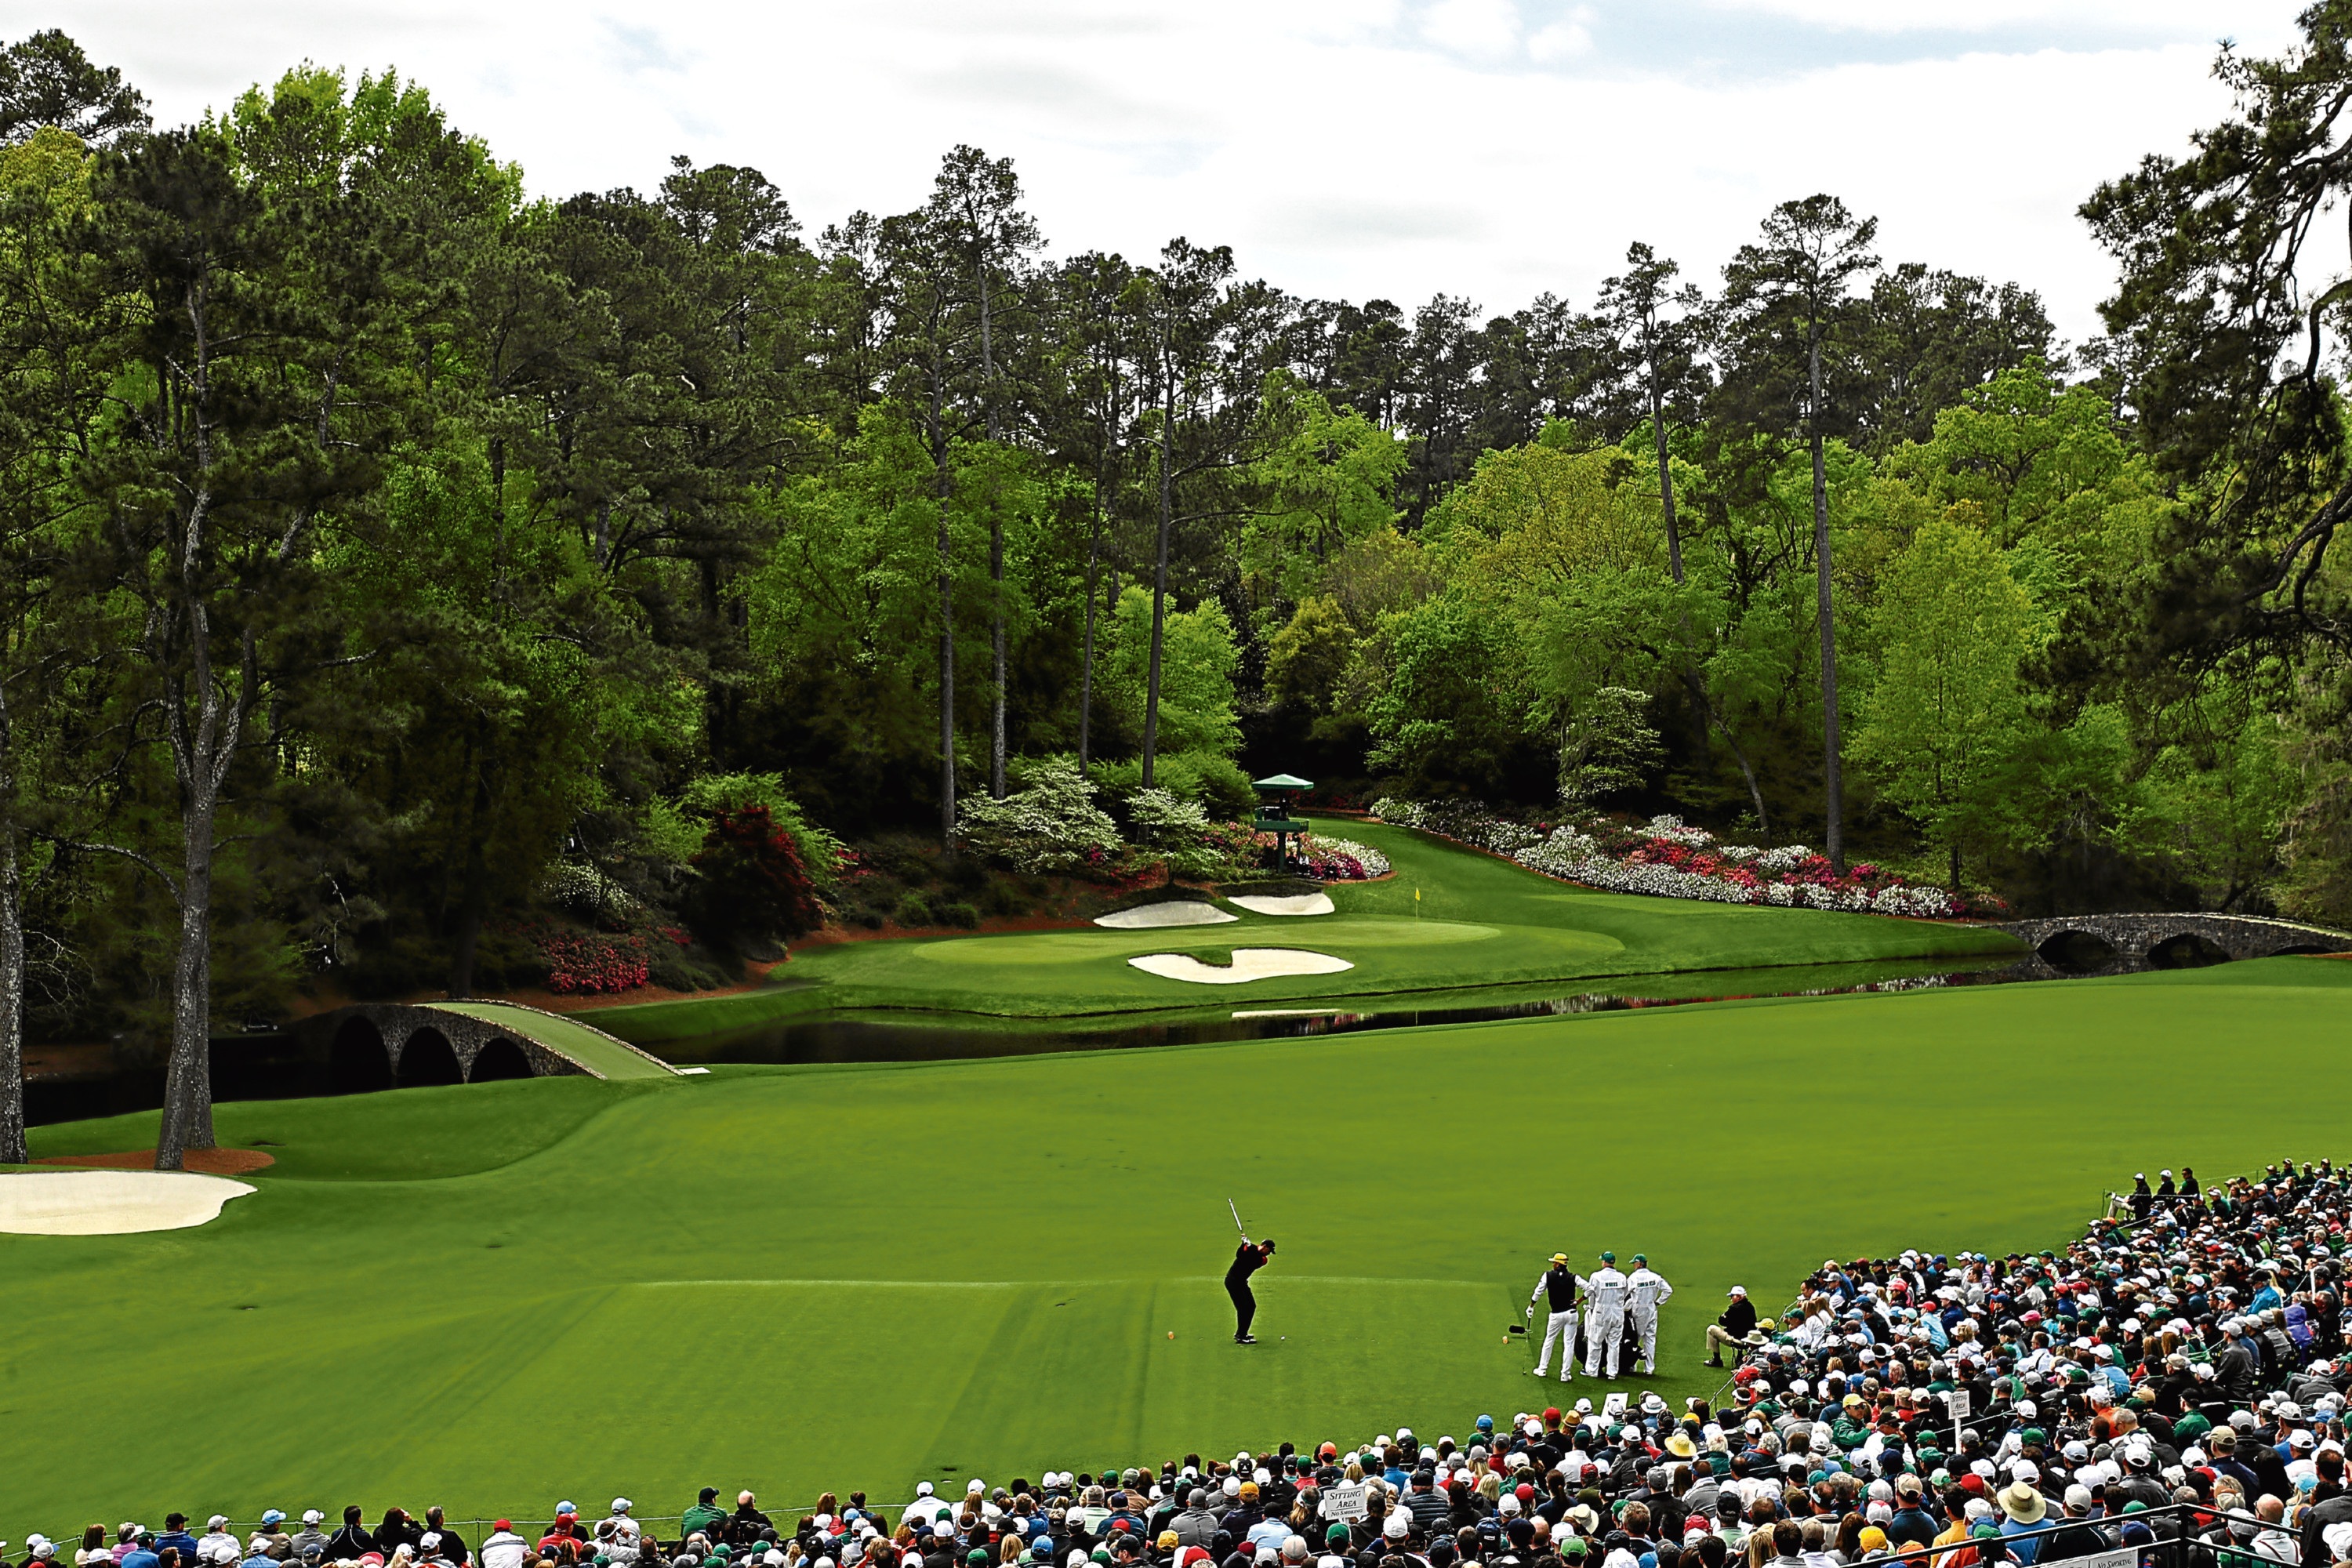 Tiger Woods of the United States plays his first shot from the 12th hole during the final round of the 2018 Masters Tournament at Augusta National Golf Club on April 8.